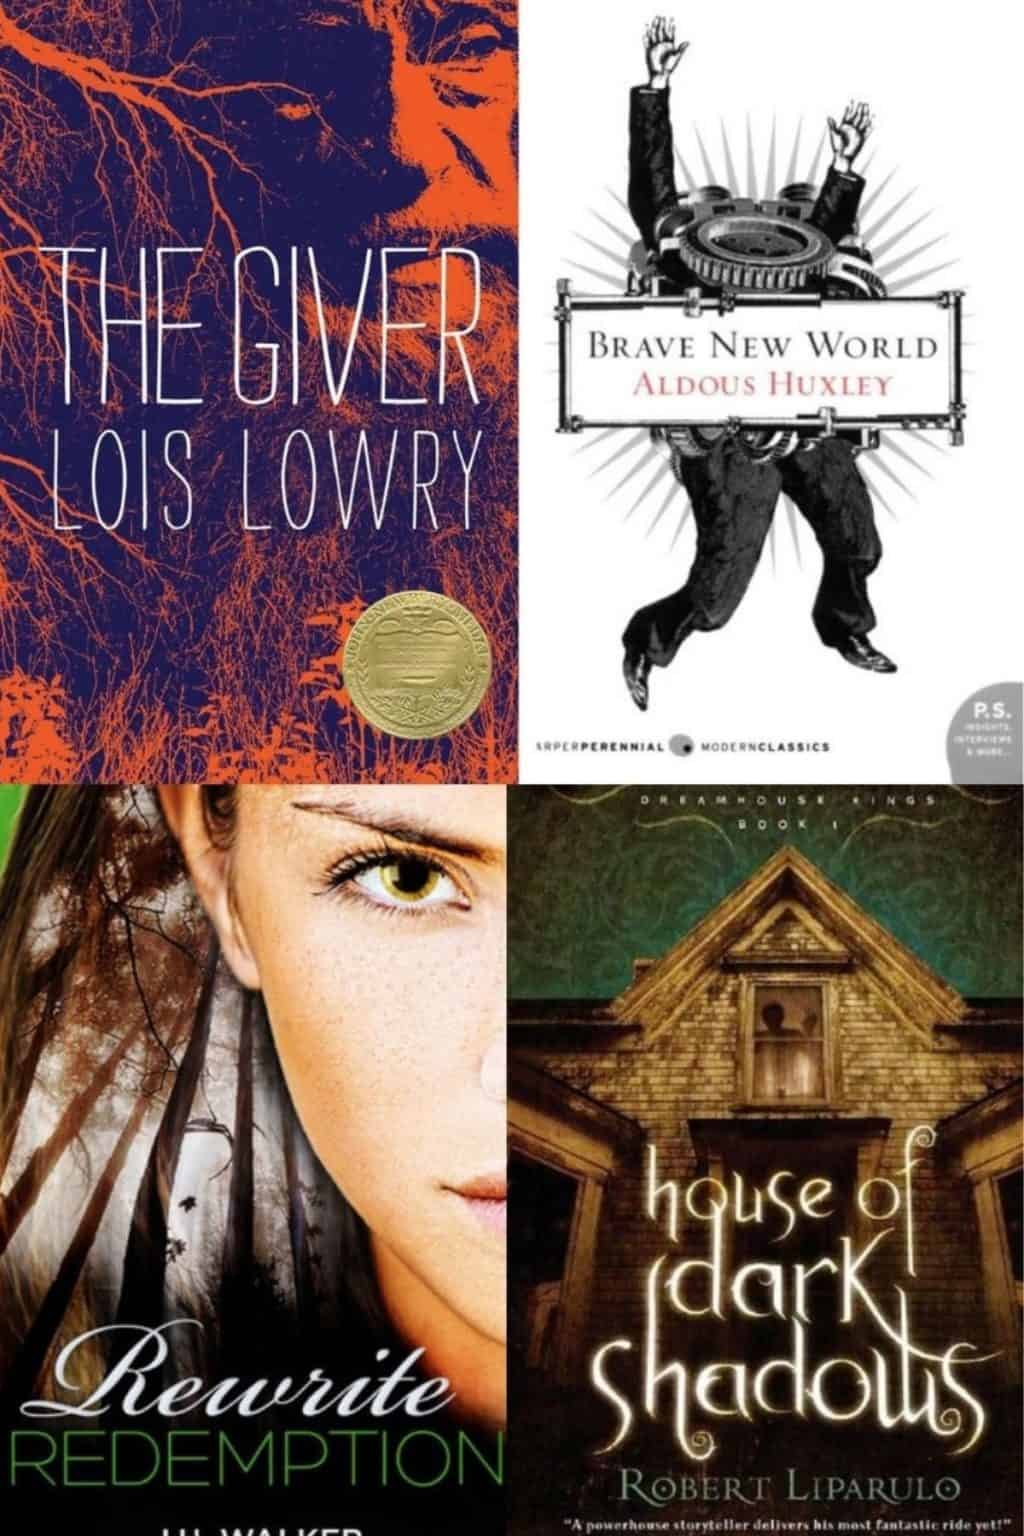 The covers of four YA Dystopian Novels including The Giver, Brave New World, Rewrite Redemption, and House of Dark Shadows.